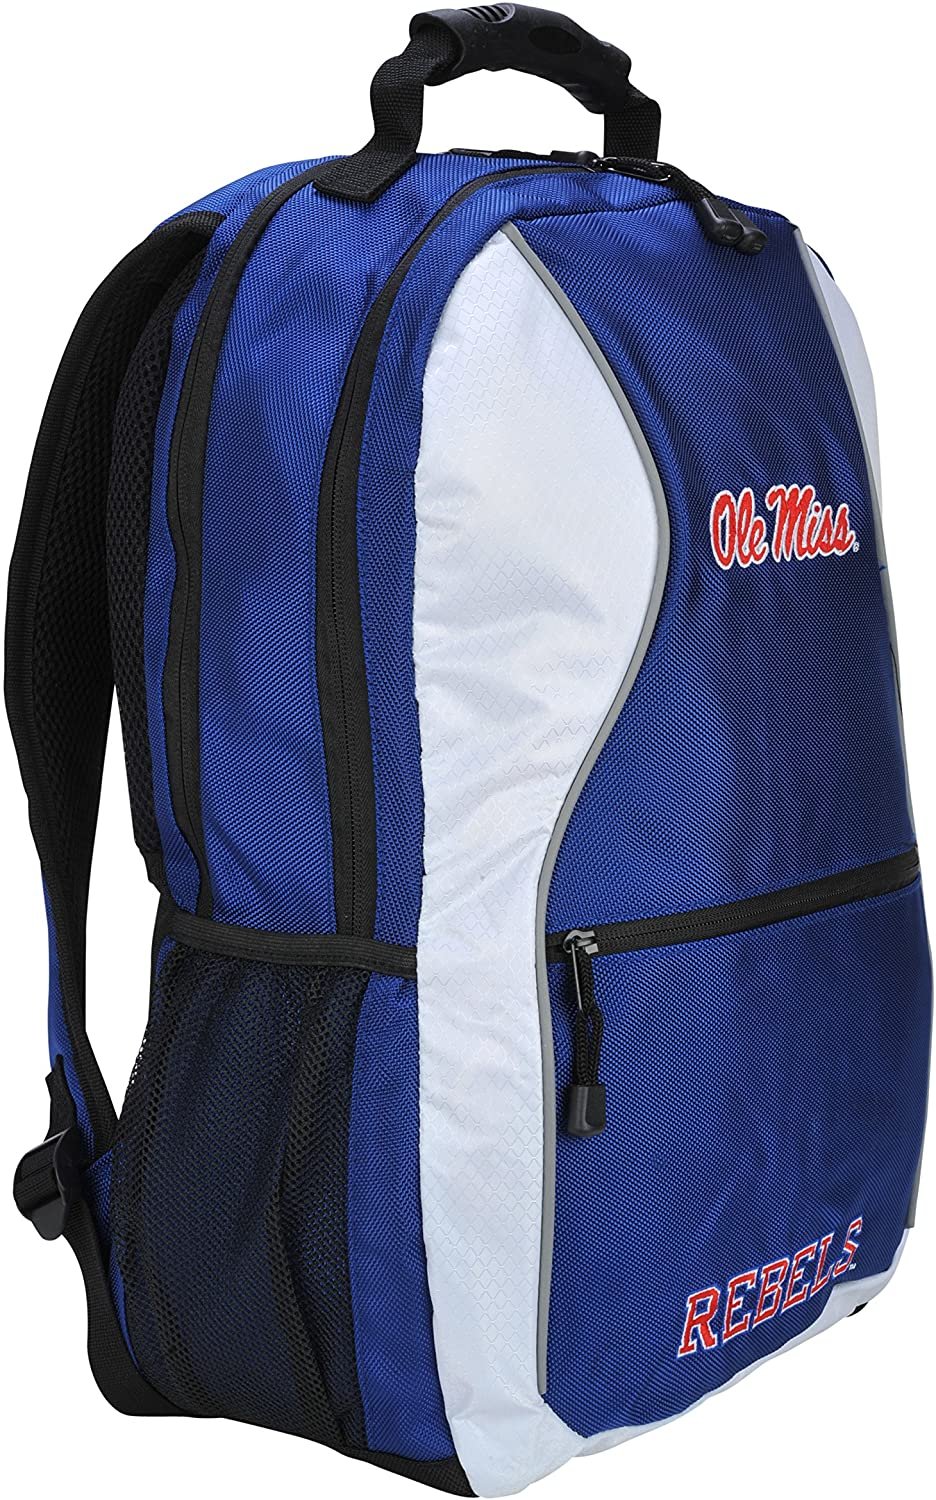 University of Mississippi Rebels Ole Miss Backpack Premium Heavy Duty Team Color Phenom Design, Adult 19x12x8 Inch